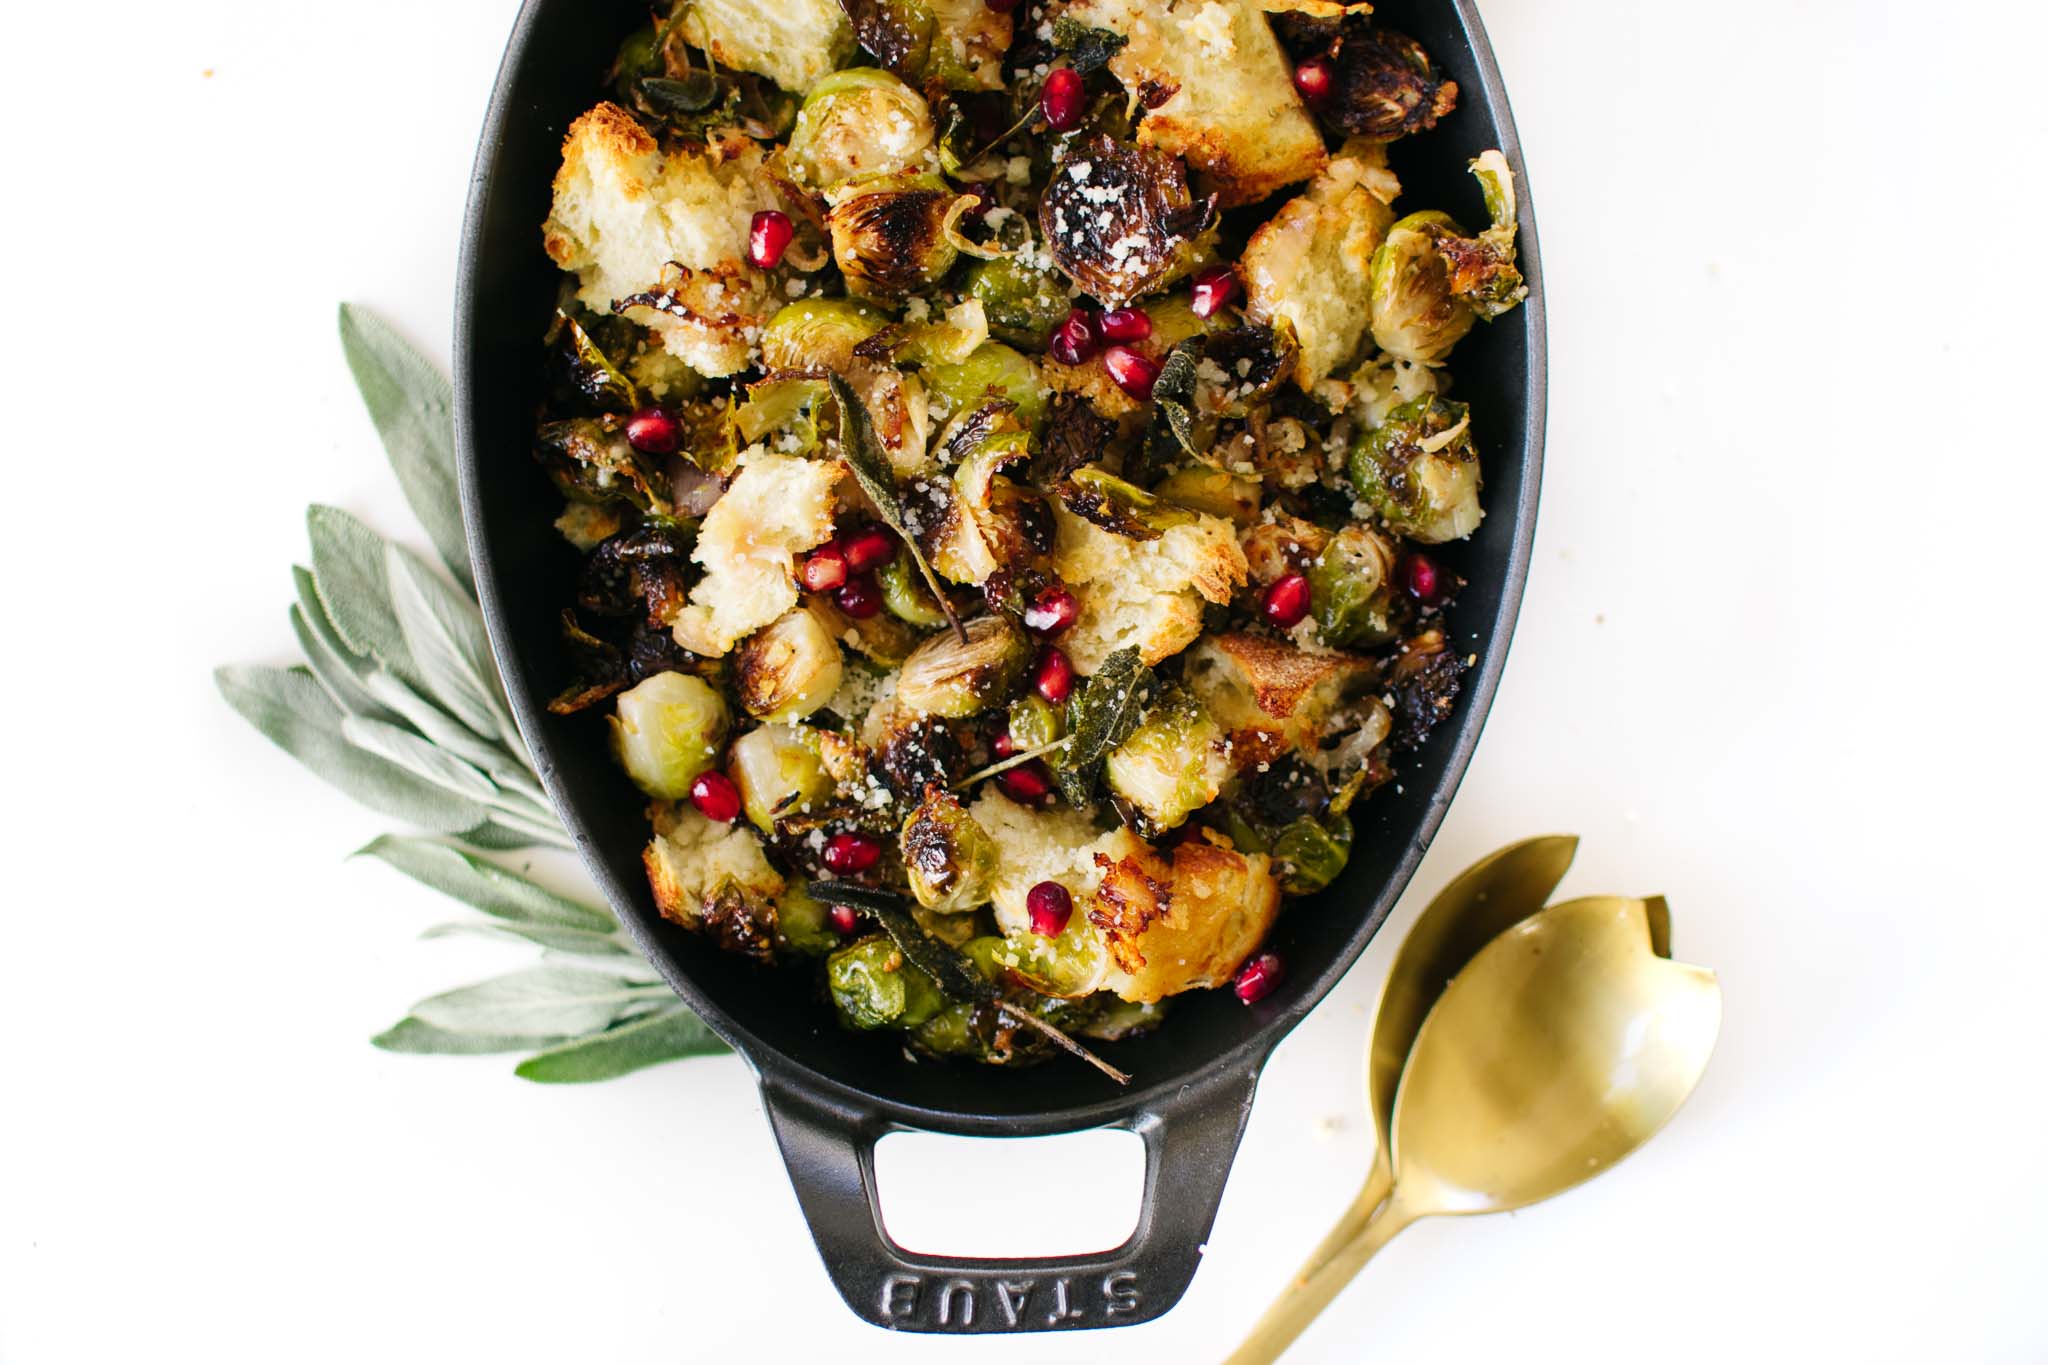 SAGE ROASTED BRUSSELS SPROUTS WITH CHEESY BREAD CHUNKS.